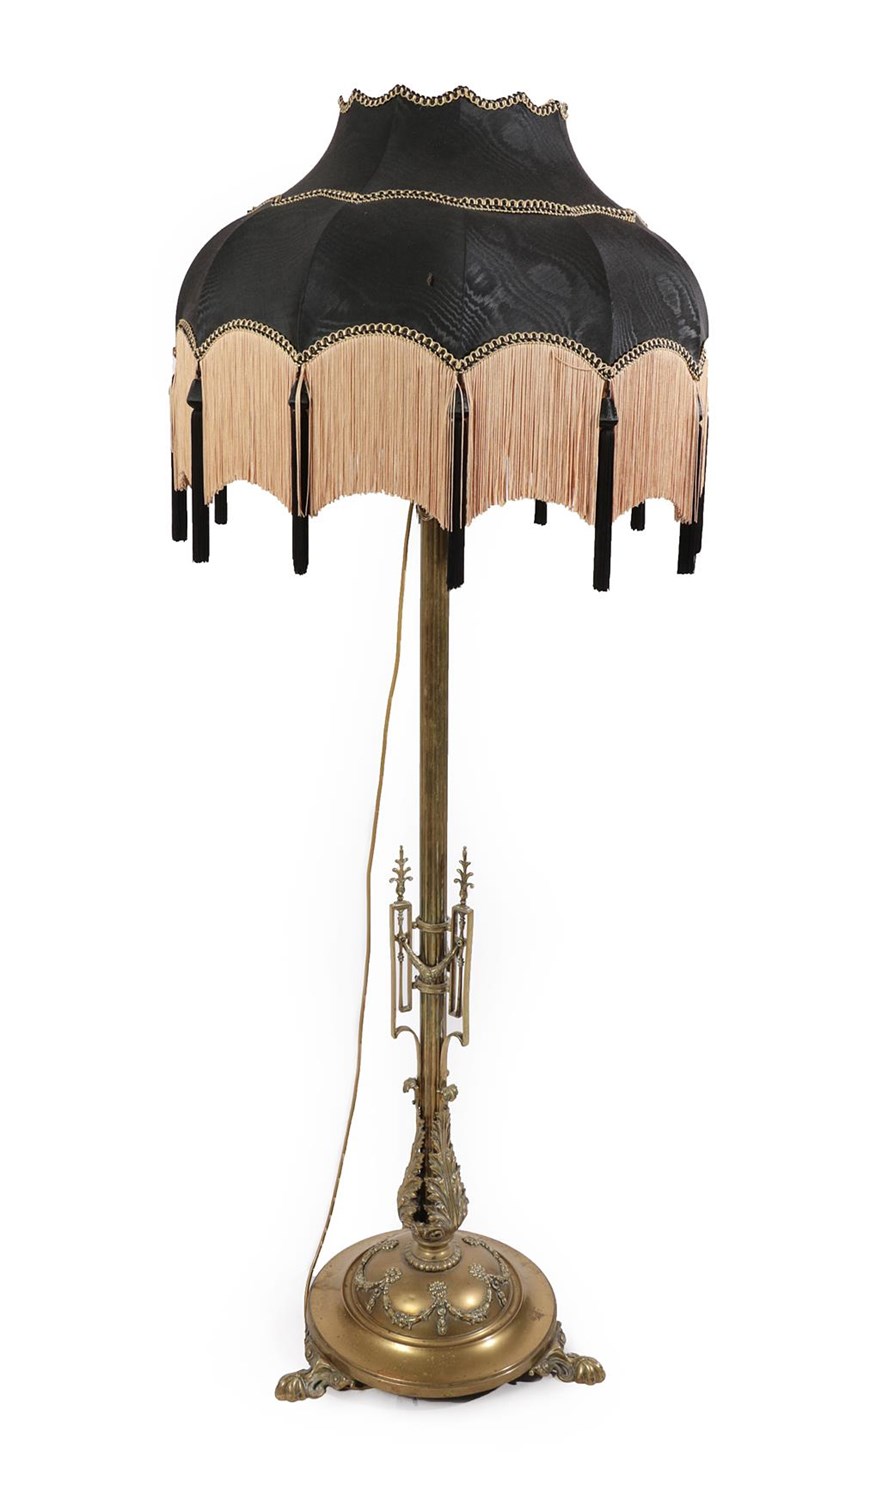 Lot 250 - A Victorian Telescopic Brass Standard Lamp, the reeded stem with applied swag work decoration above